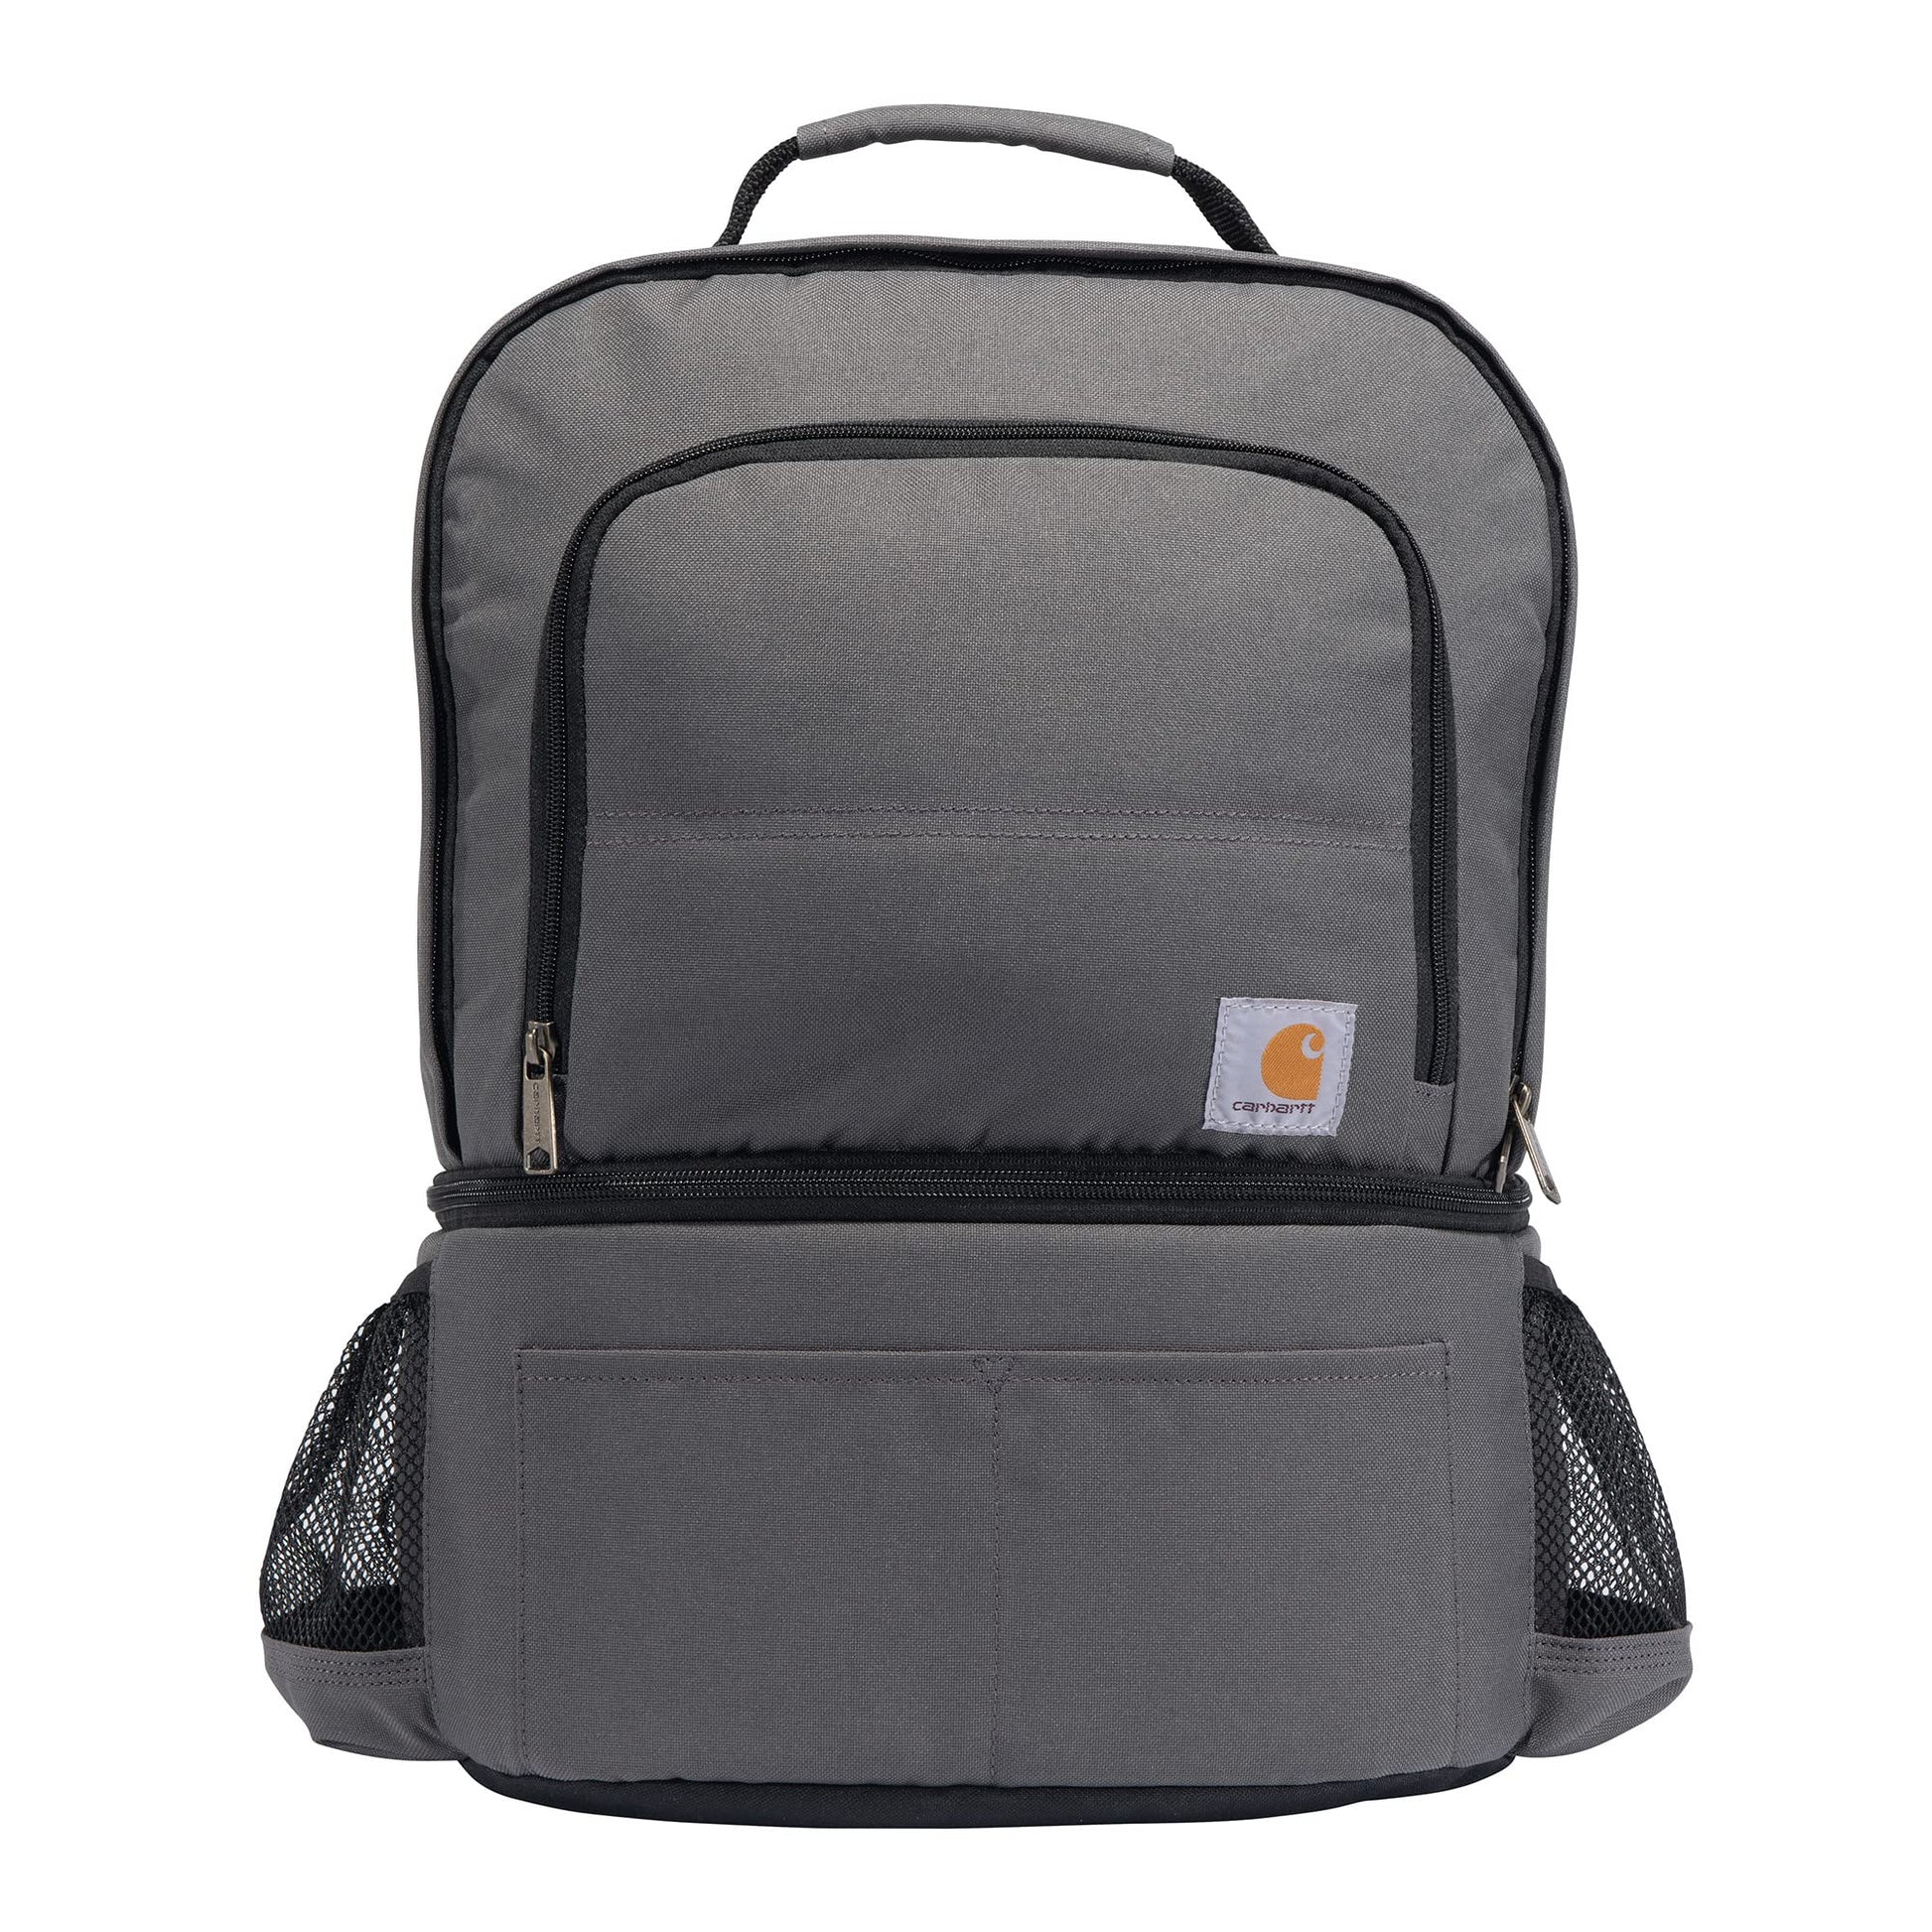 Carhartt Unisex Insulated Two Compartment 24-Can Cooler Backpack